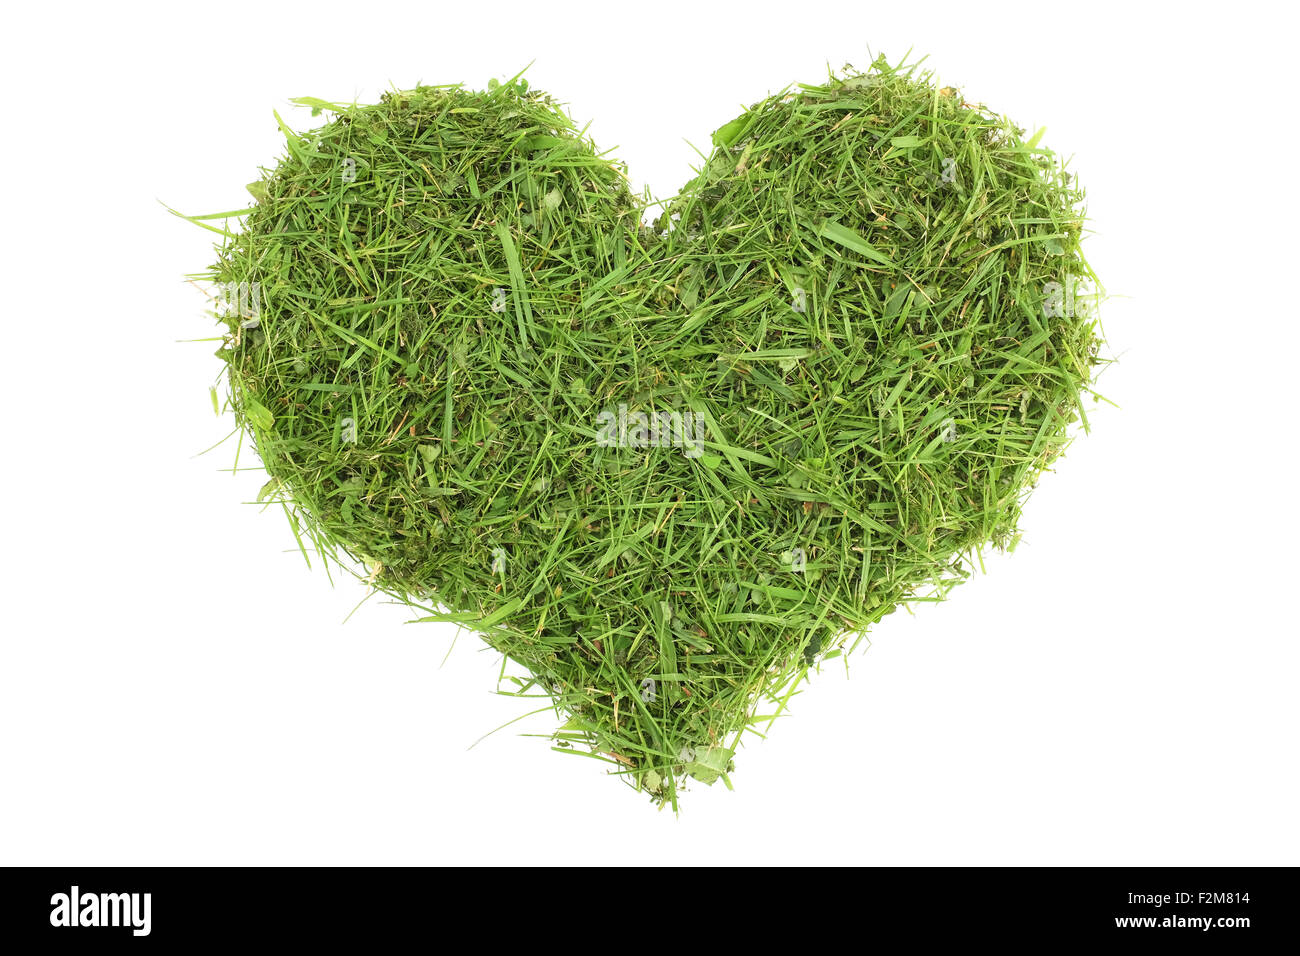 Grass clippings in a heart shape, isolated on a white background Stock Photo